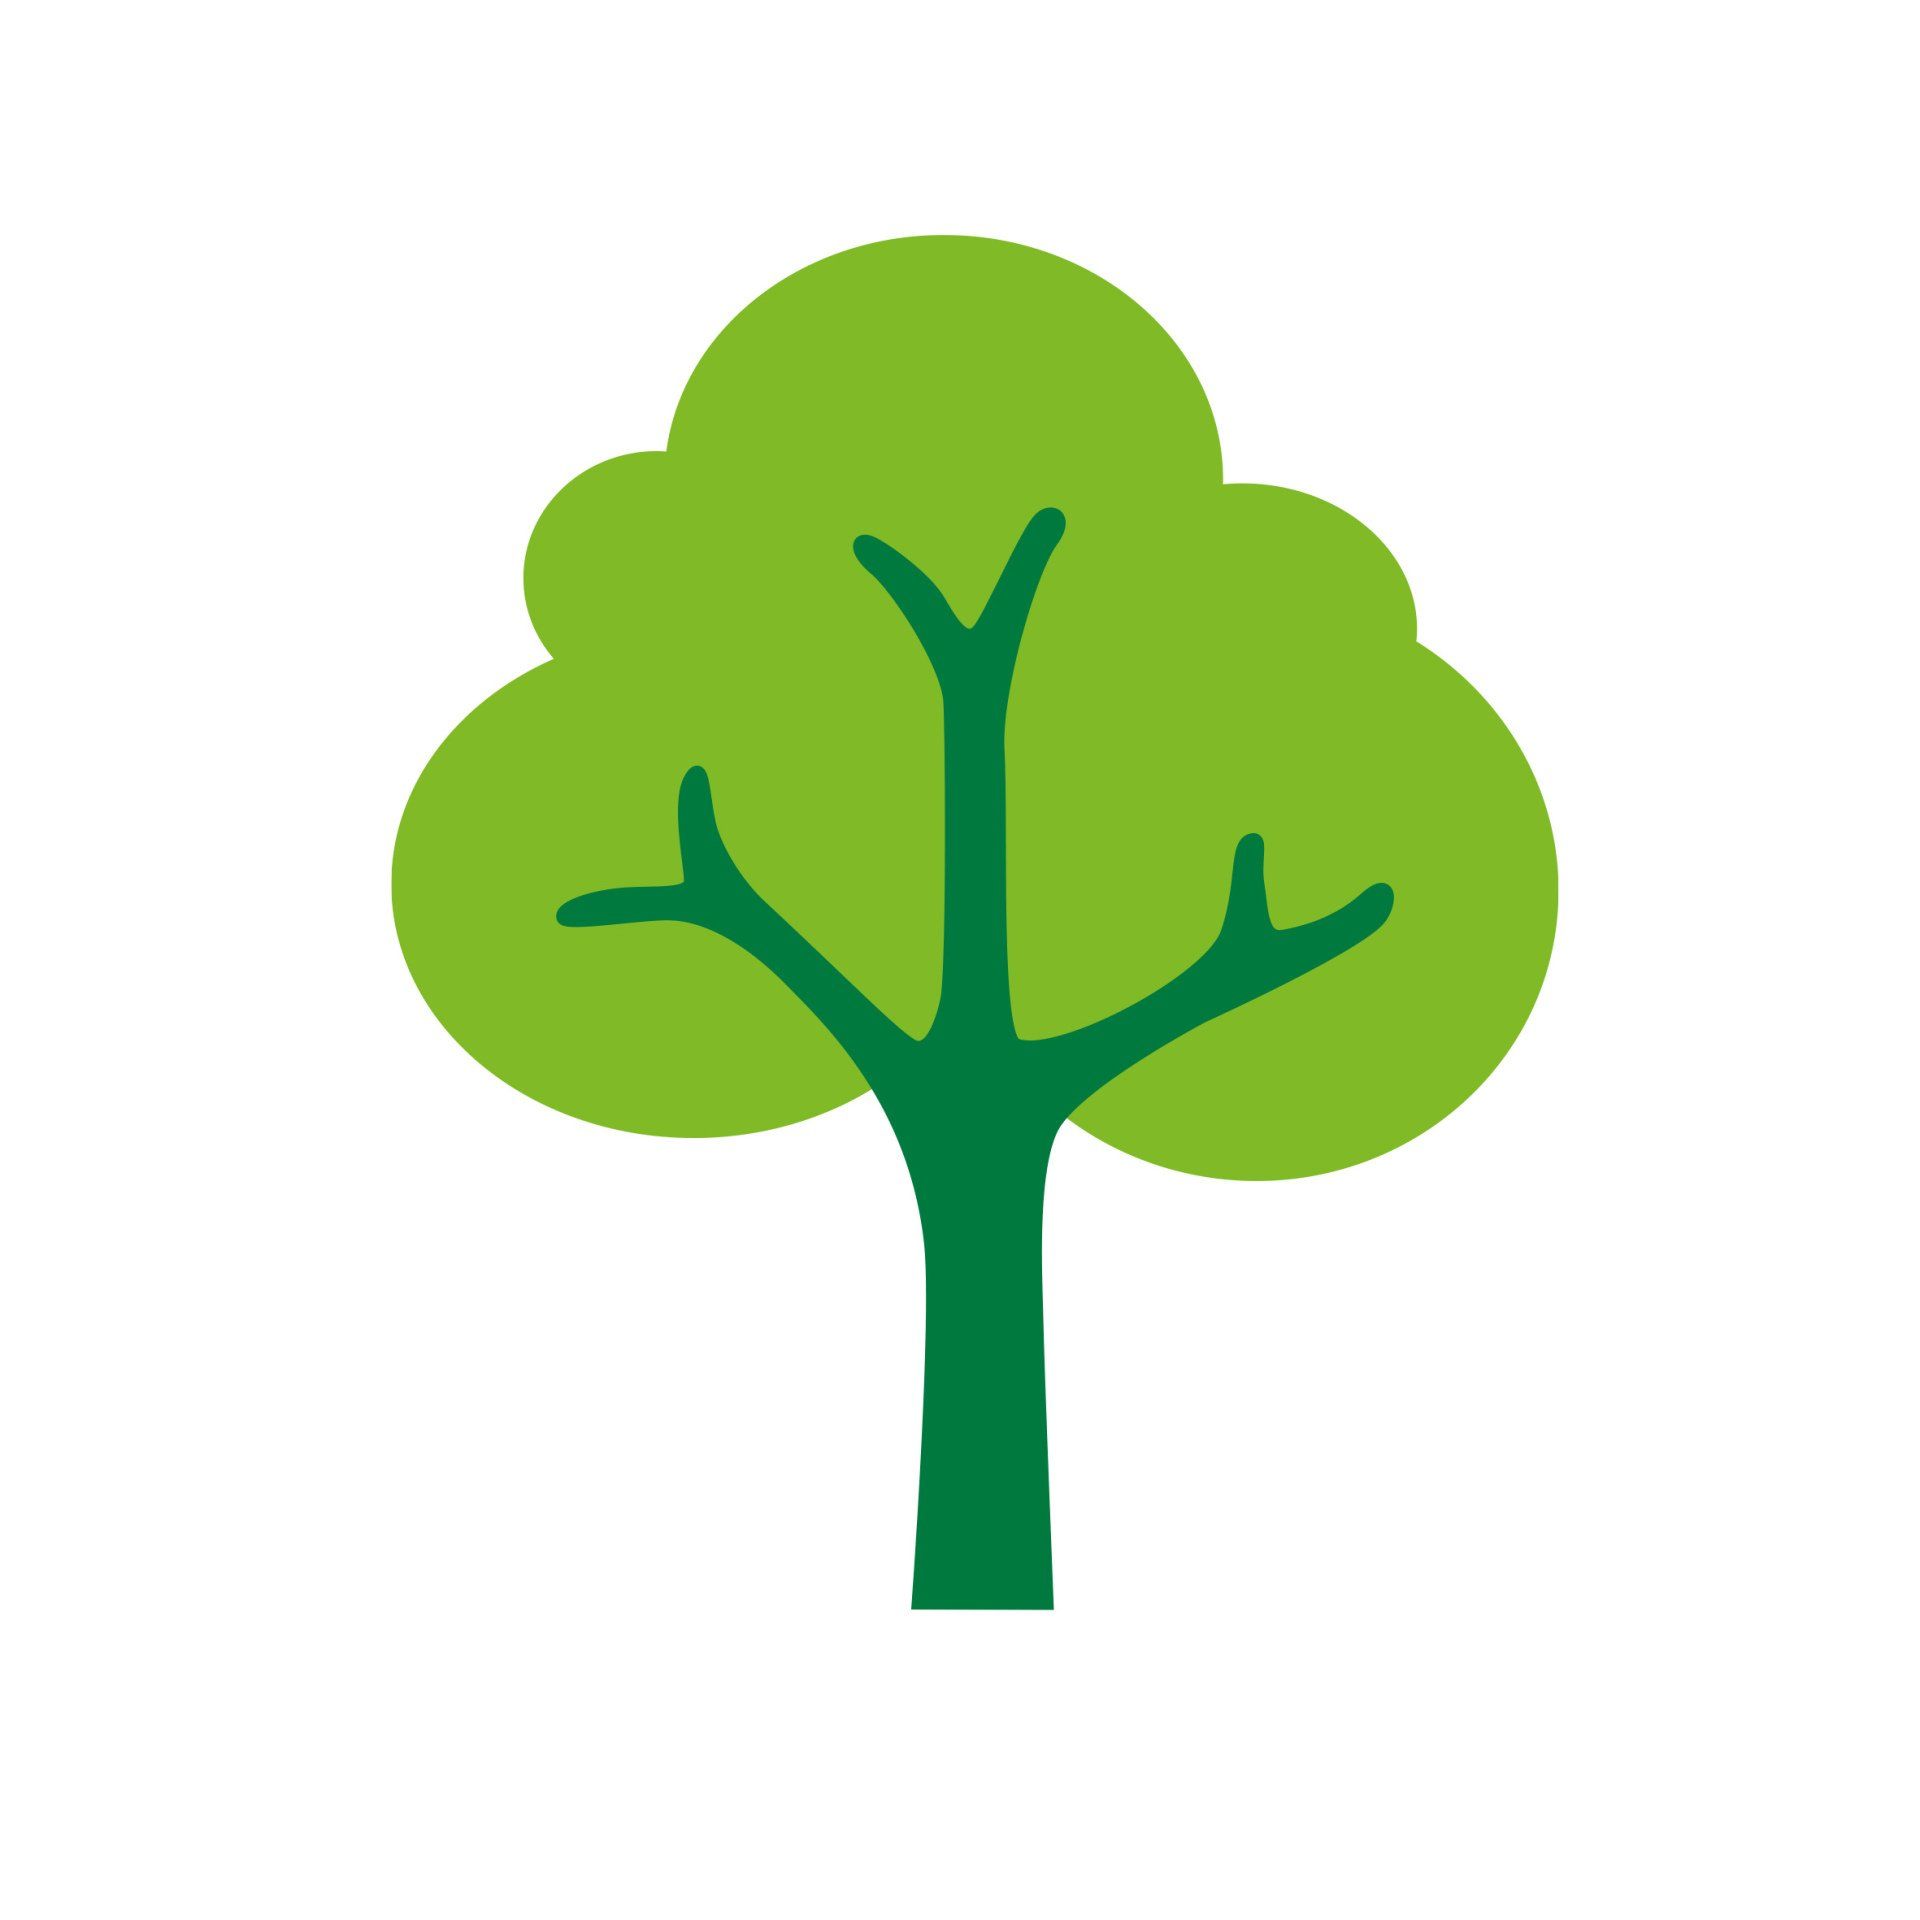 A tree from the logo of Nell Bank Outooor education centre